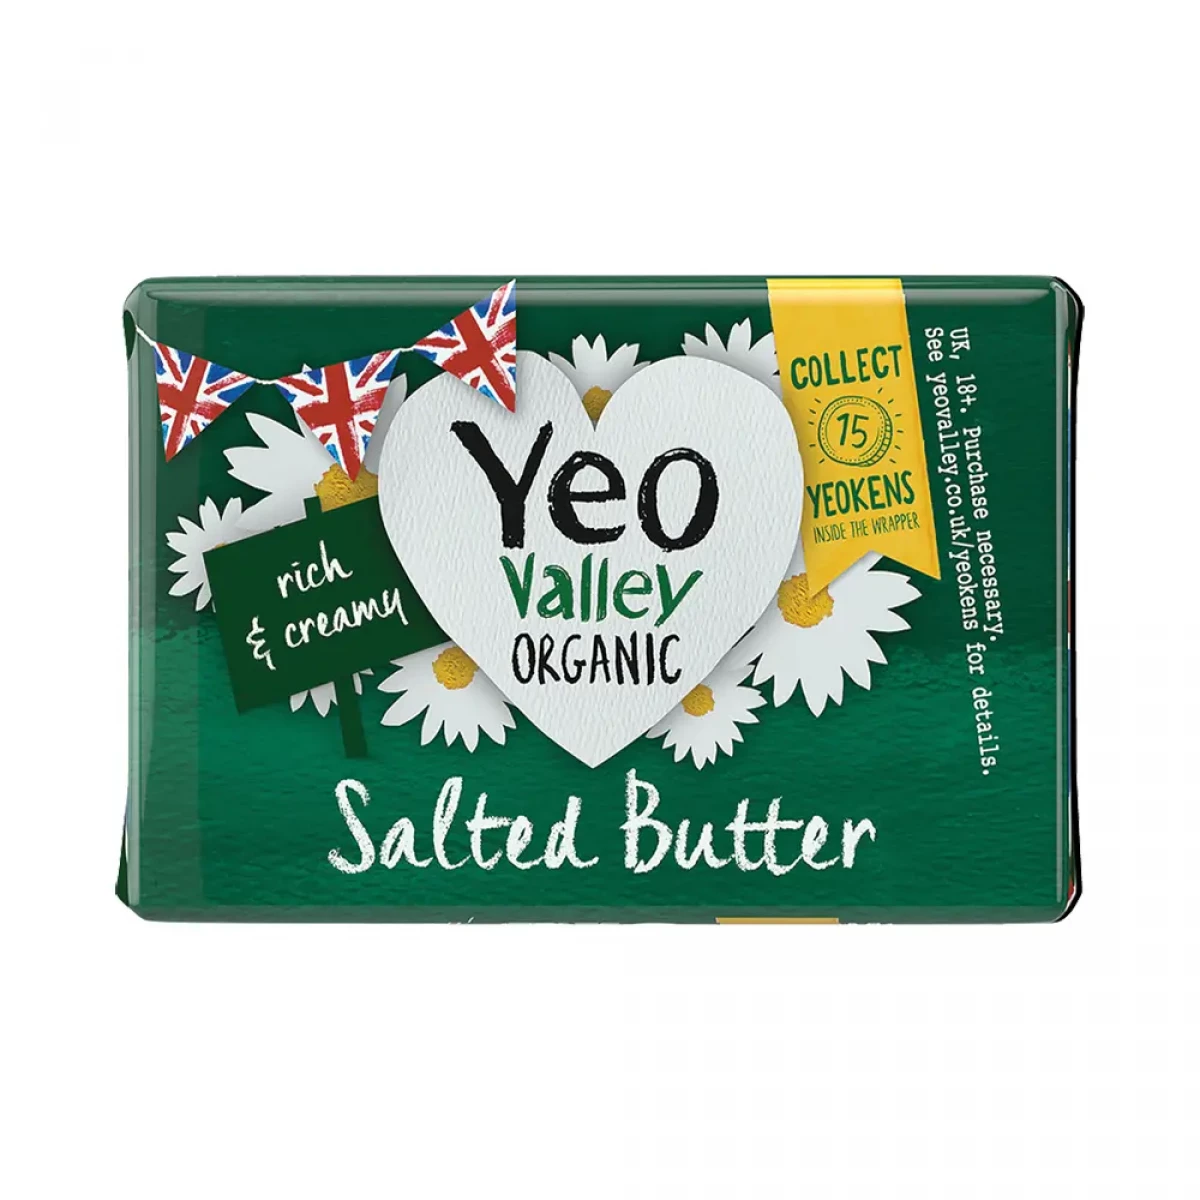 Product picture for Organic Salted Butter